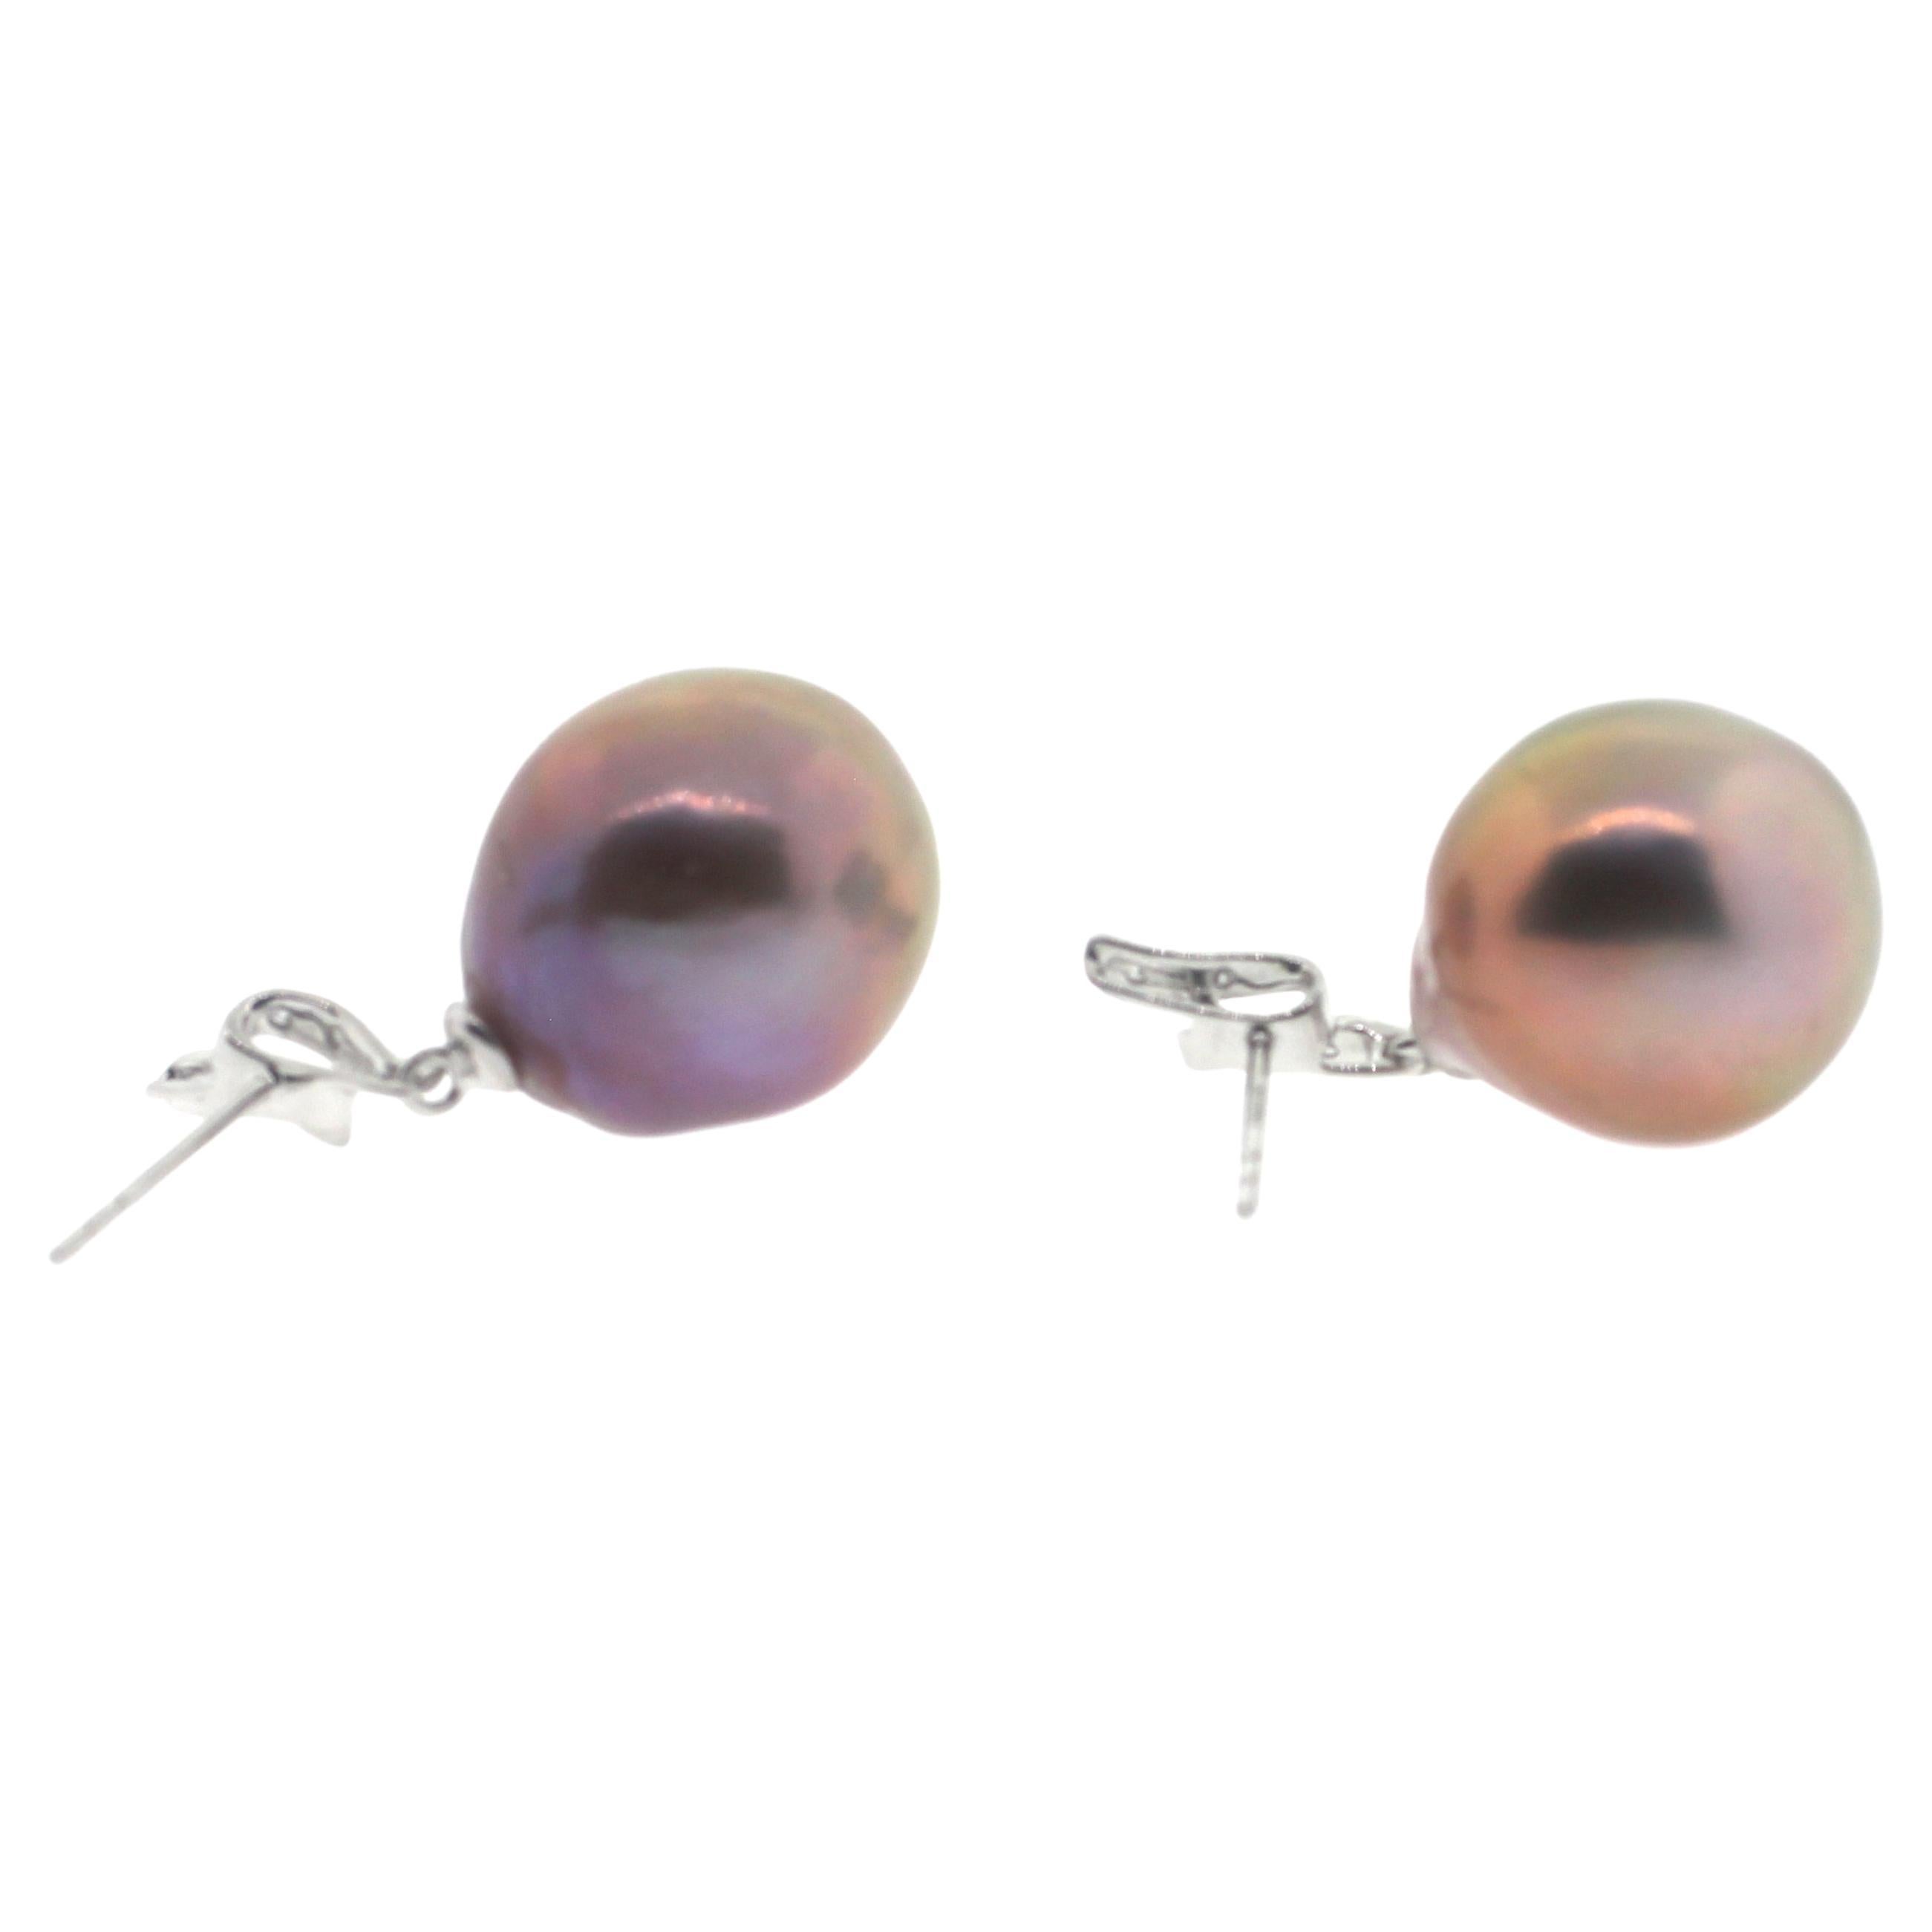 Hakimoto By Jewel Of Ocean
18K White Gold and Diamond 
Fancy Natural Color Metallic Baroque Pearl Earrings.
Hight 1.1 inch
Total item weight 8.4 grams
Featuring 0.038 Carats of Round Brilliant Diamonds
15-13mm Fancy Metallic color Baroque Cultured